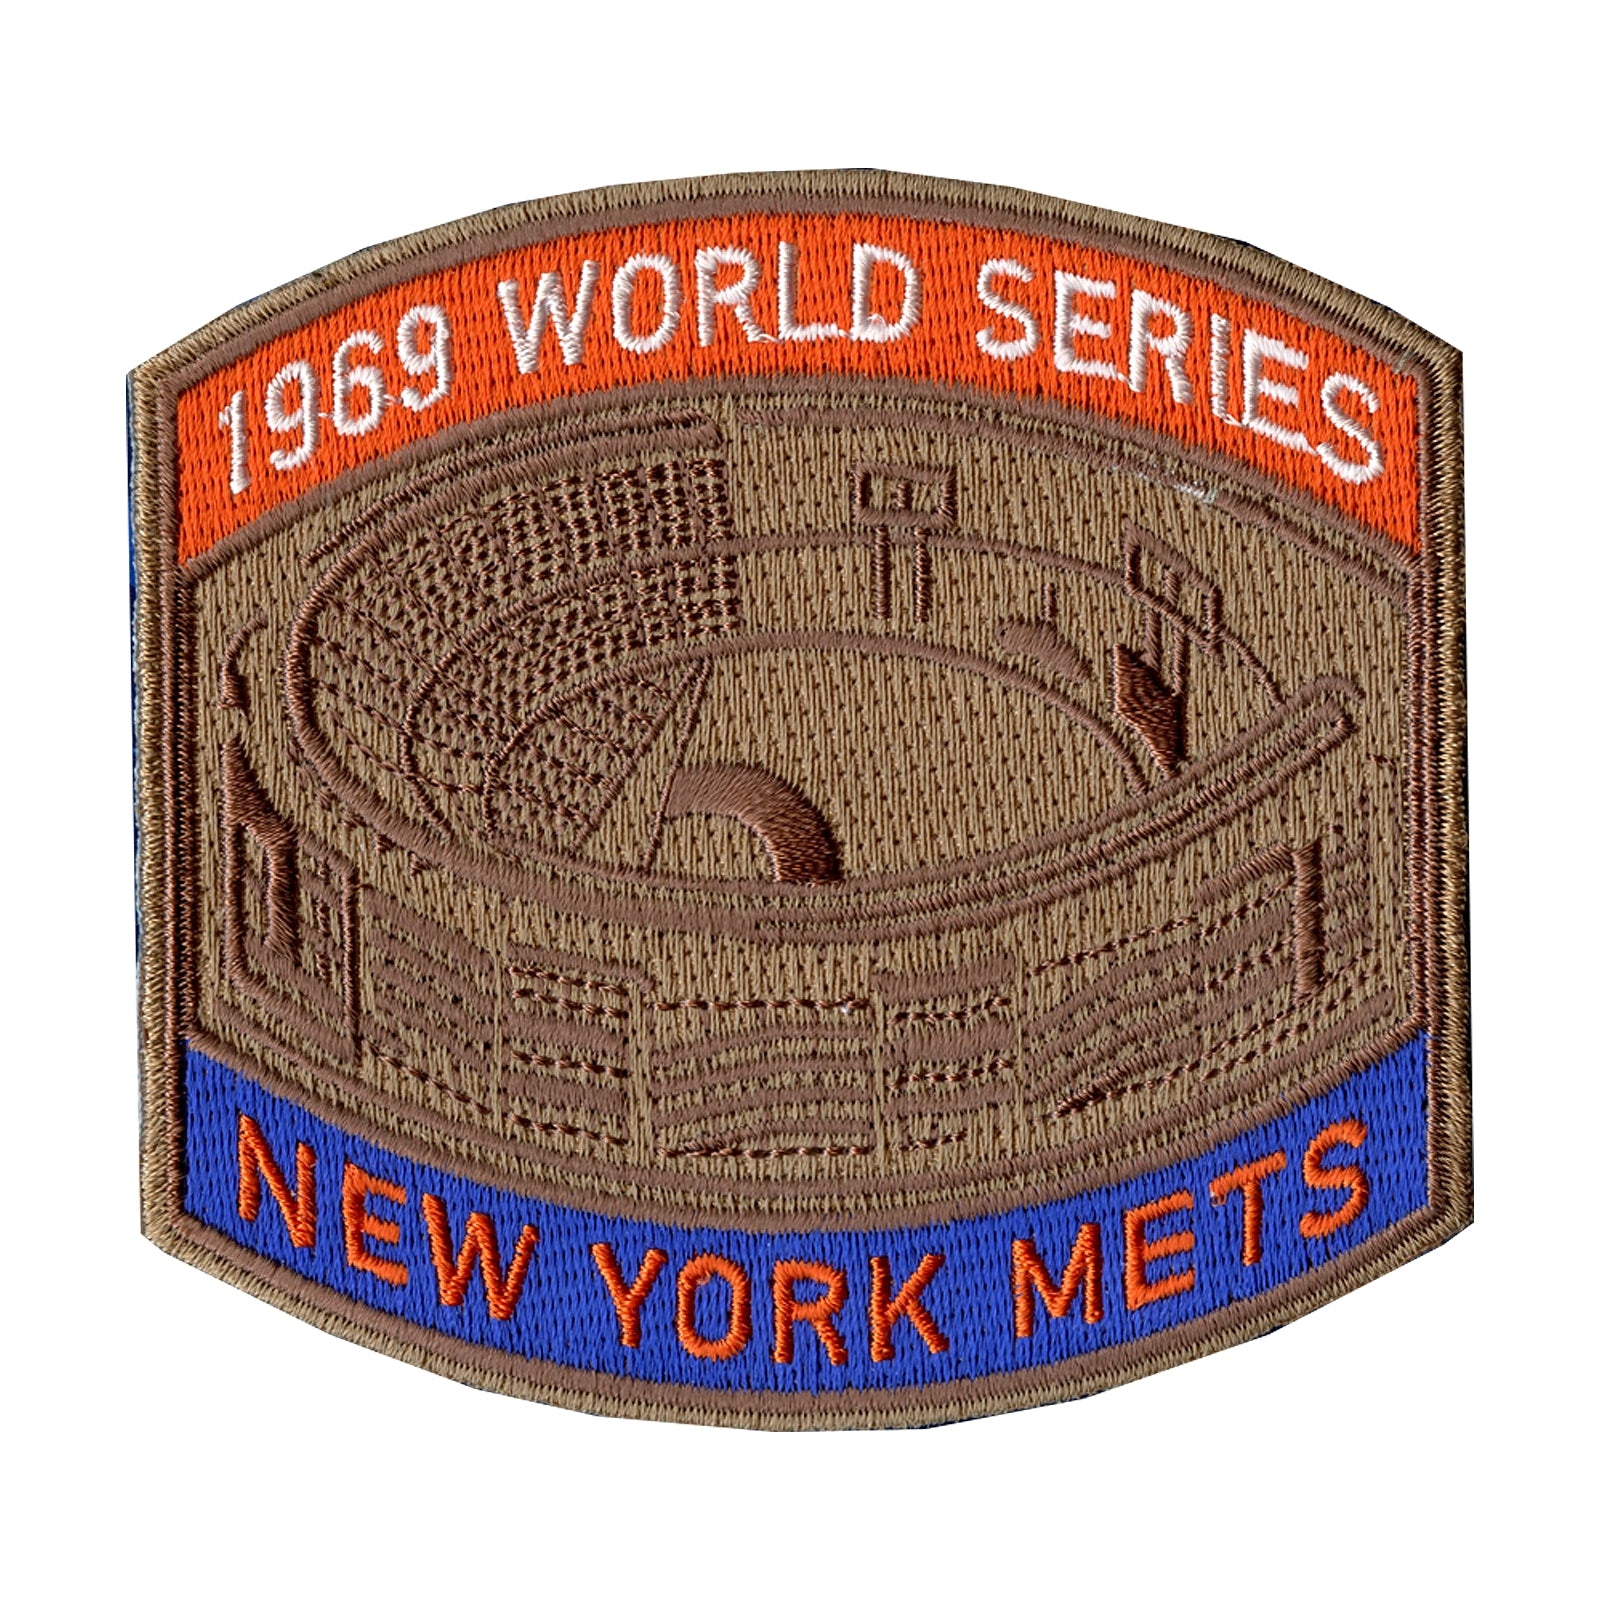 New York Mets 1969 World Series Champions Patch